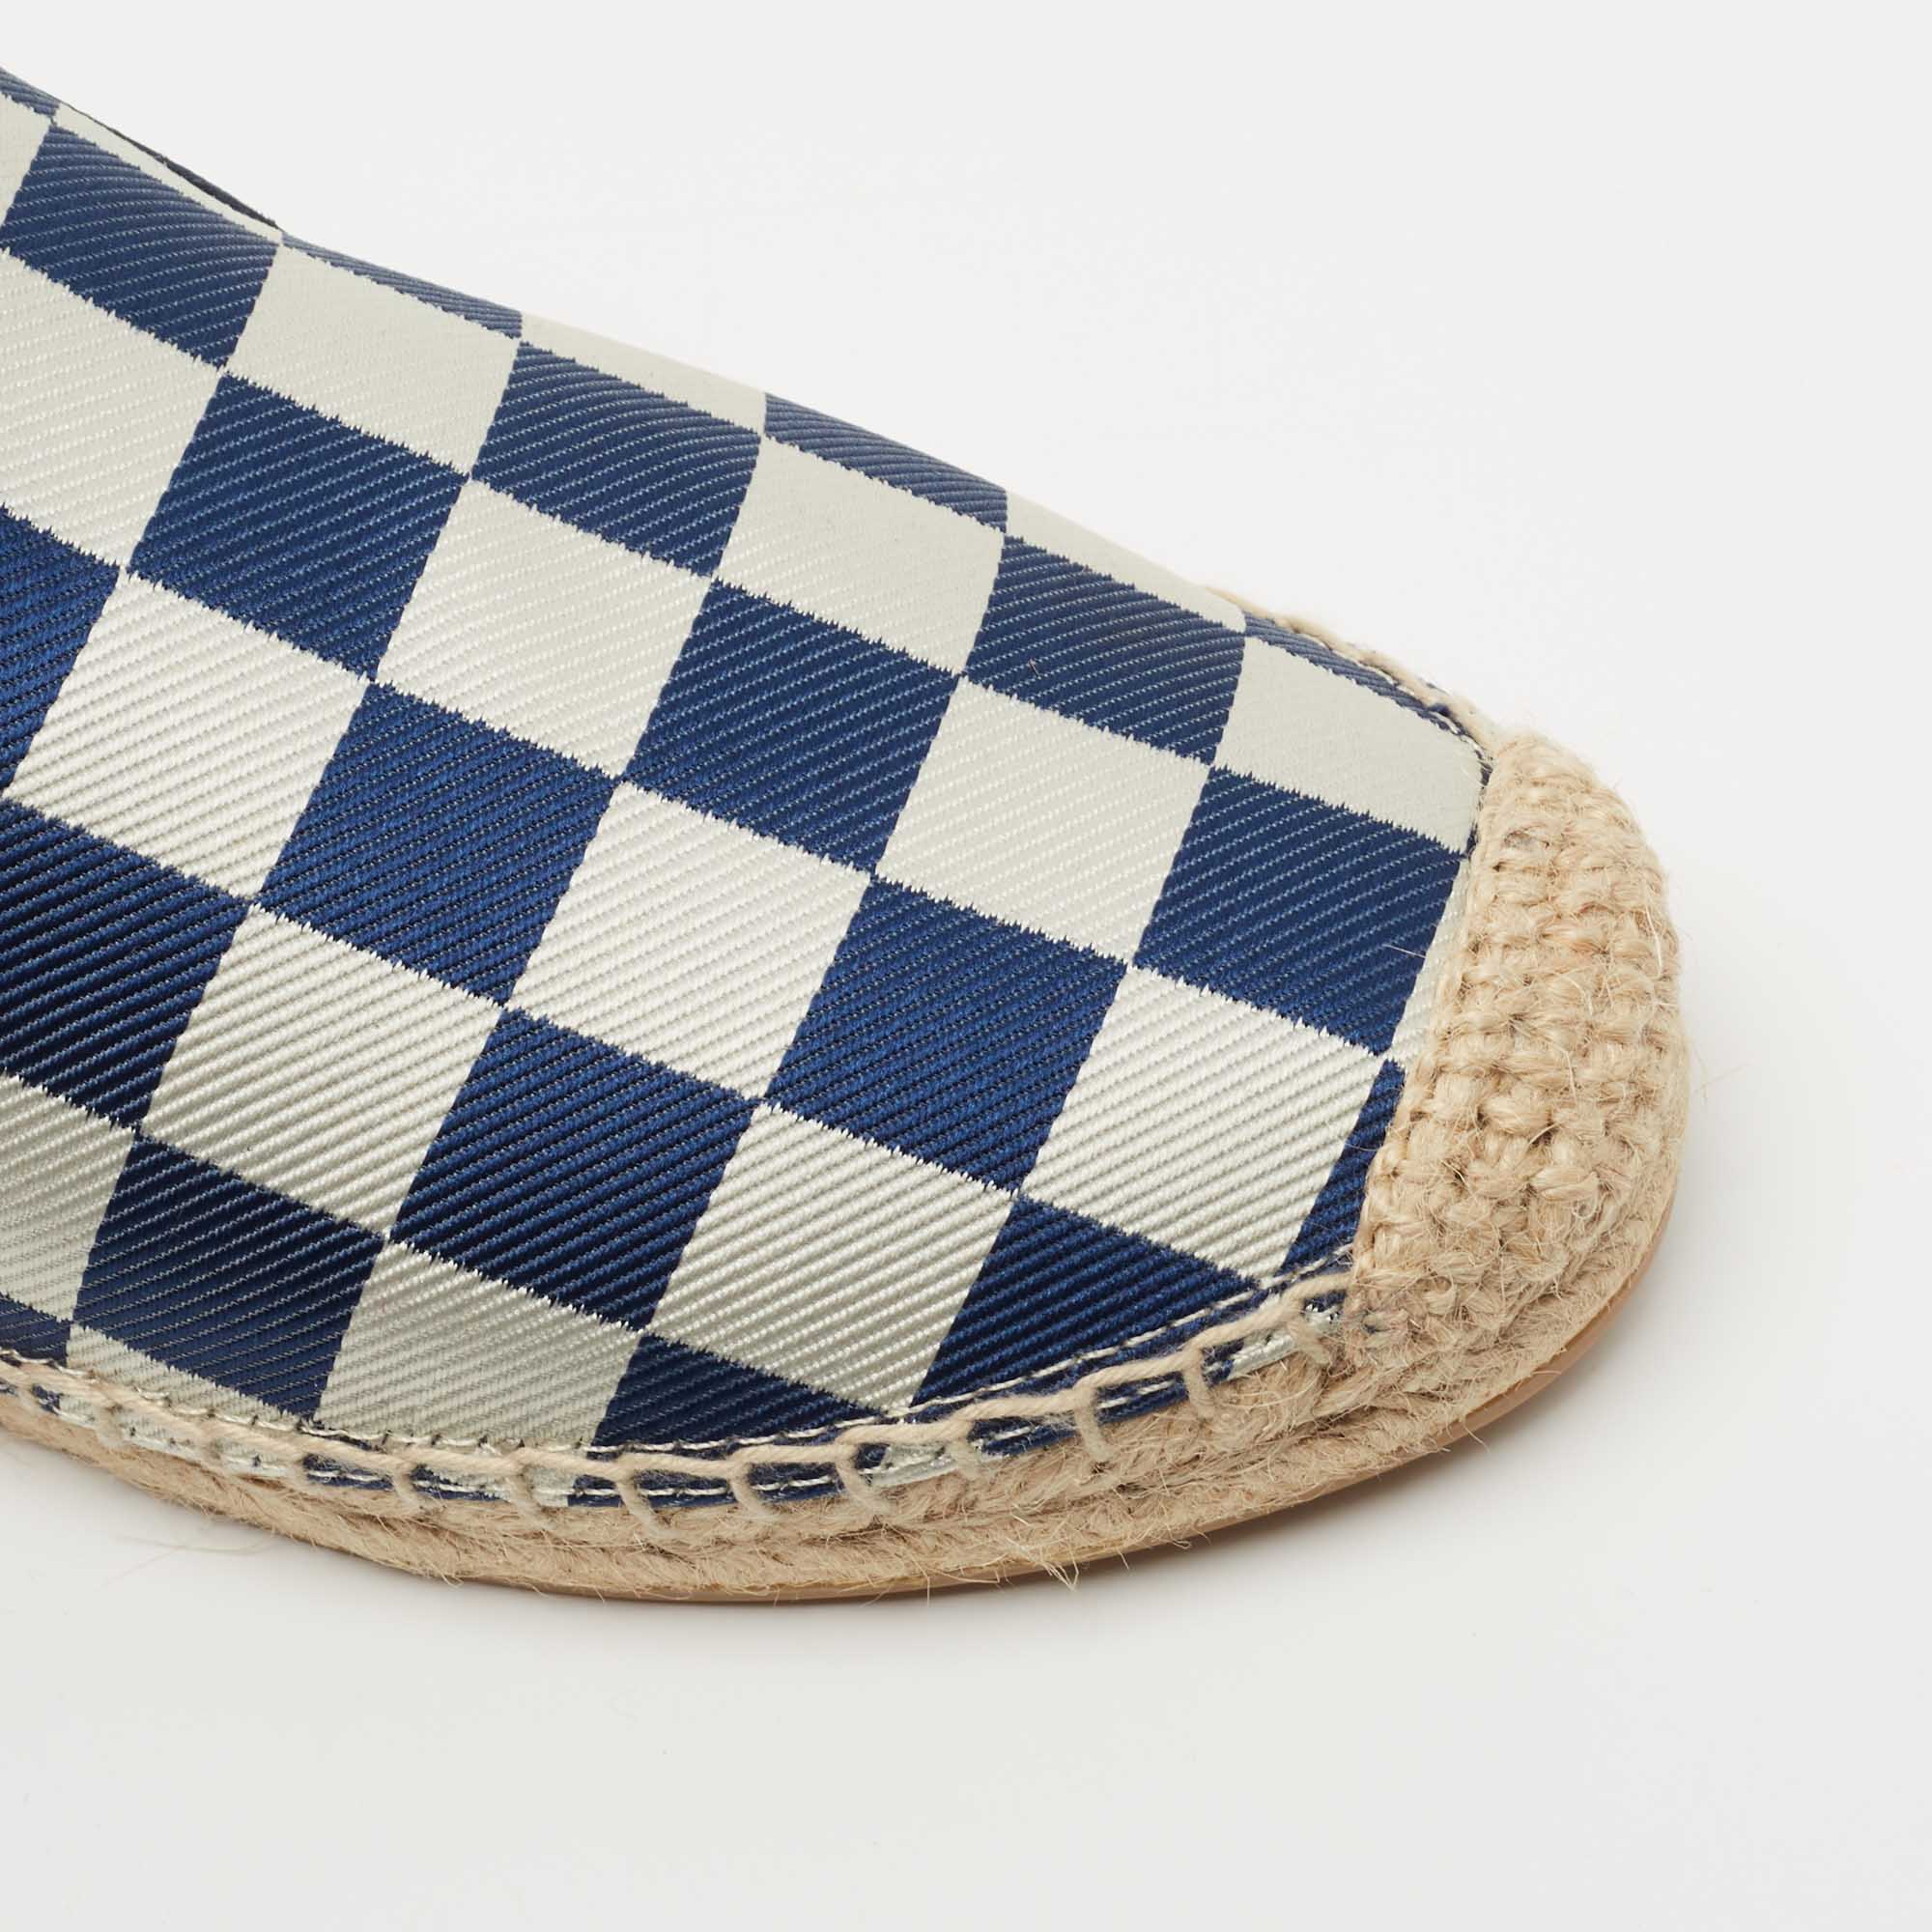 Marc By Marc Jacobs Blue/White Canvas Checkered Espadrille Flats Size 35.5